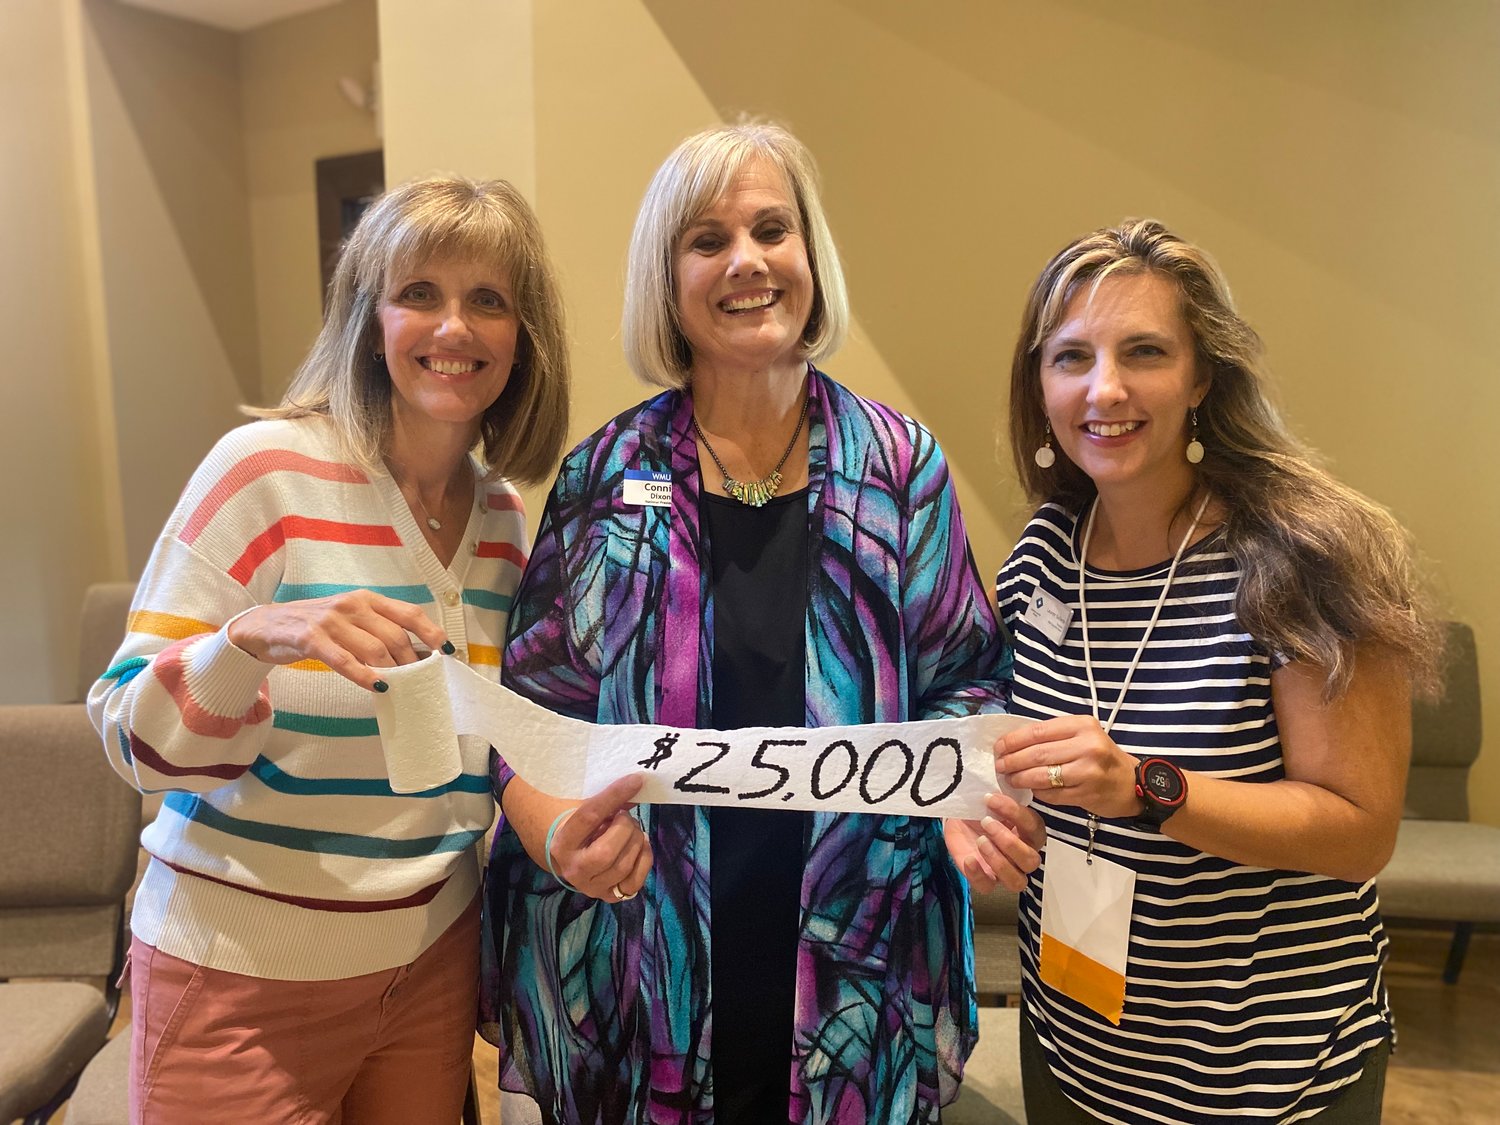 Georgians Beth Ann Williams, left, and Lauren Sullens, right, pose with national WMU President Connie Dixon and a roll of toilet paper used to  announce a $25,000 grant for Camp Pinnacle.